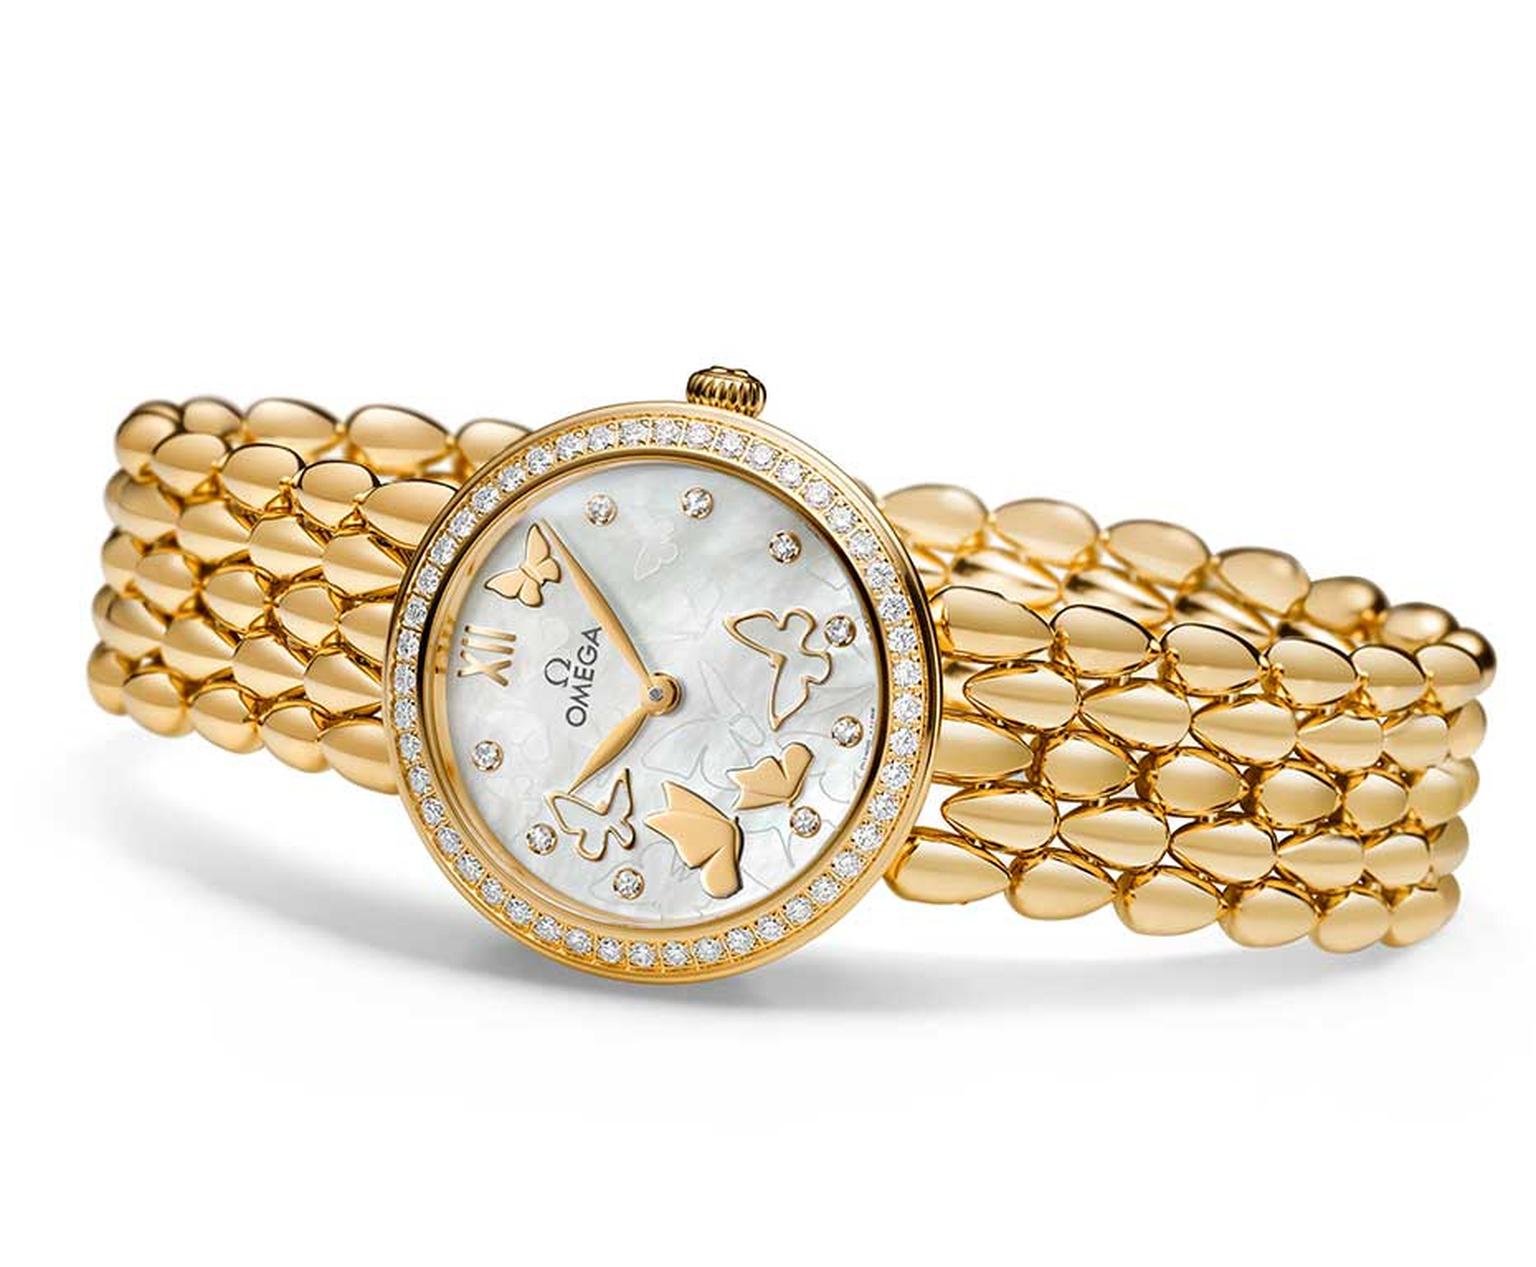 Omega De Ville Prestige Dewdrop 27.4mm watch in yellow gold has a glamorous gold jewelry bracelet inspired by the Omega Dewdrop collection. The dial of this model is decorated with diamond indices and gold butterflies against a white mother-of-pearl backg